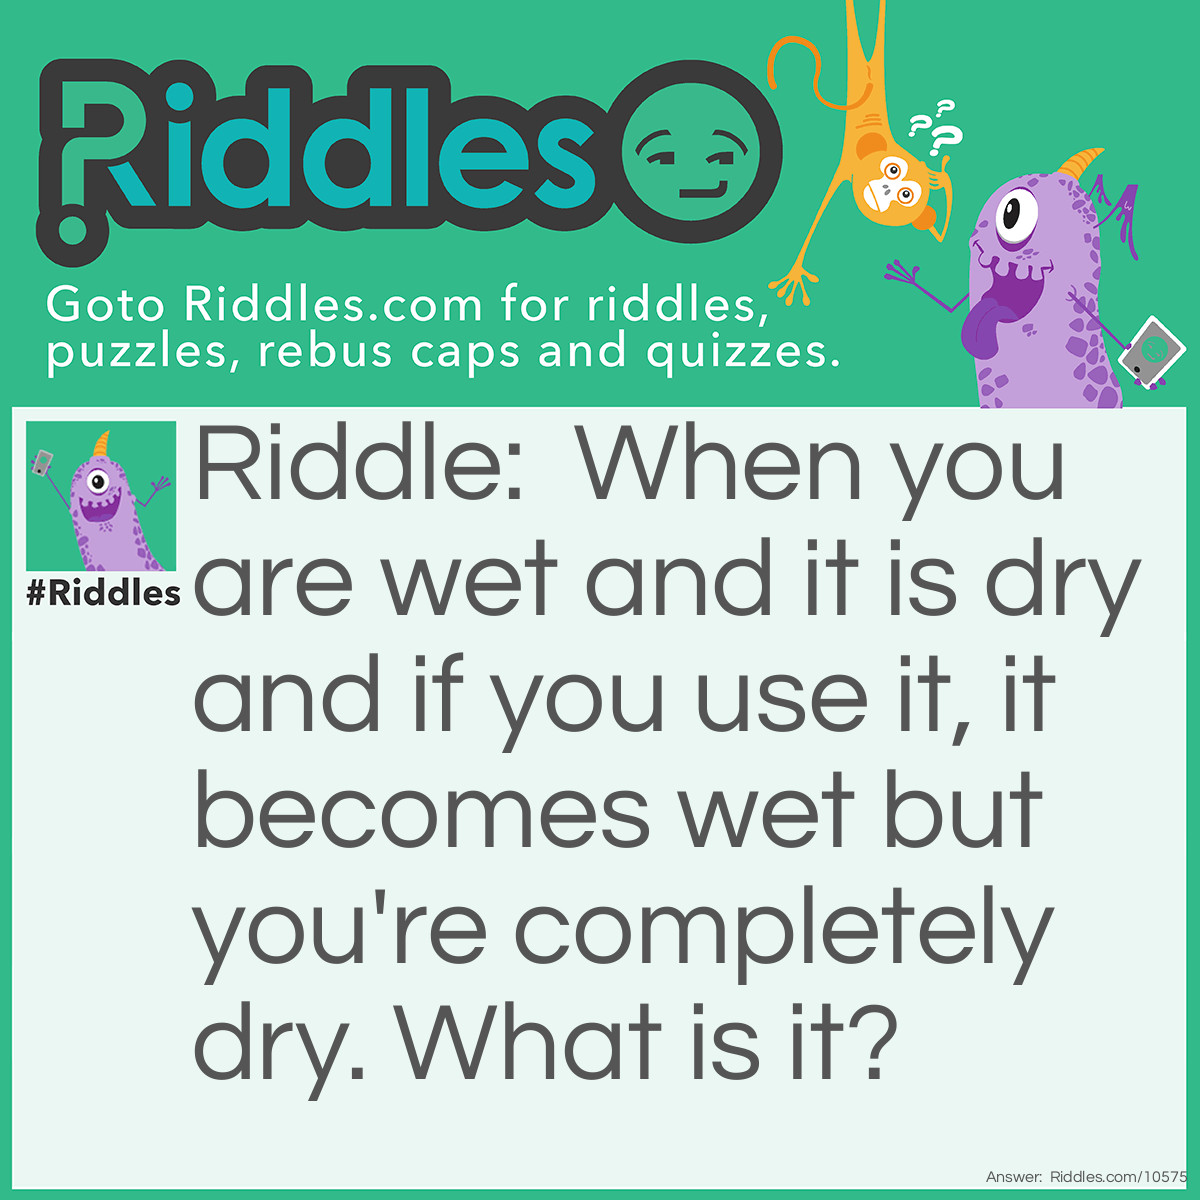 Riddle: When you are wet and it is dry and if you use it, it becomes wet but you're completely dry. What is it? Answer: The towel.